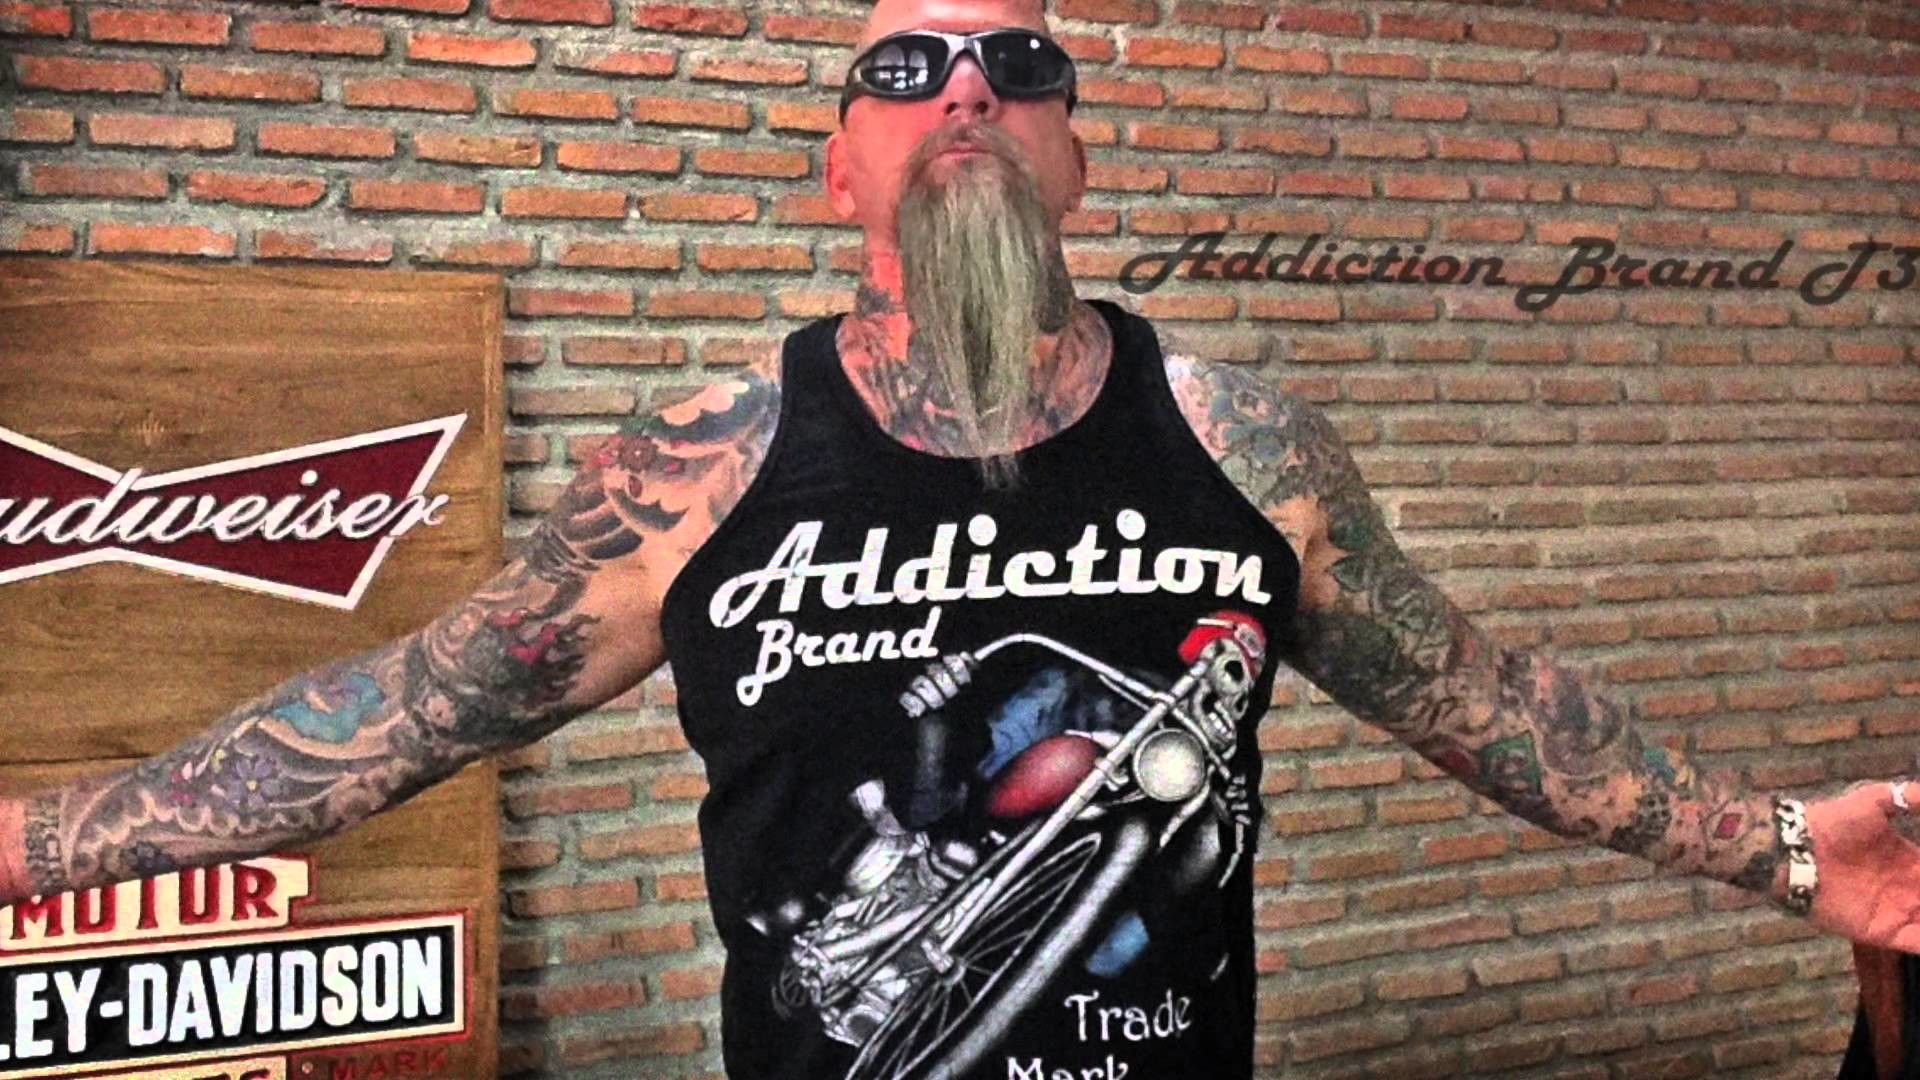 1920x1080 Harley Davidson Style Biker T-Shirts and Motorcycle Clothing by Addiction  Brand - YouTube